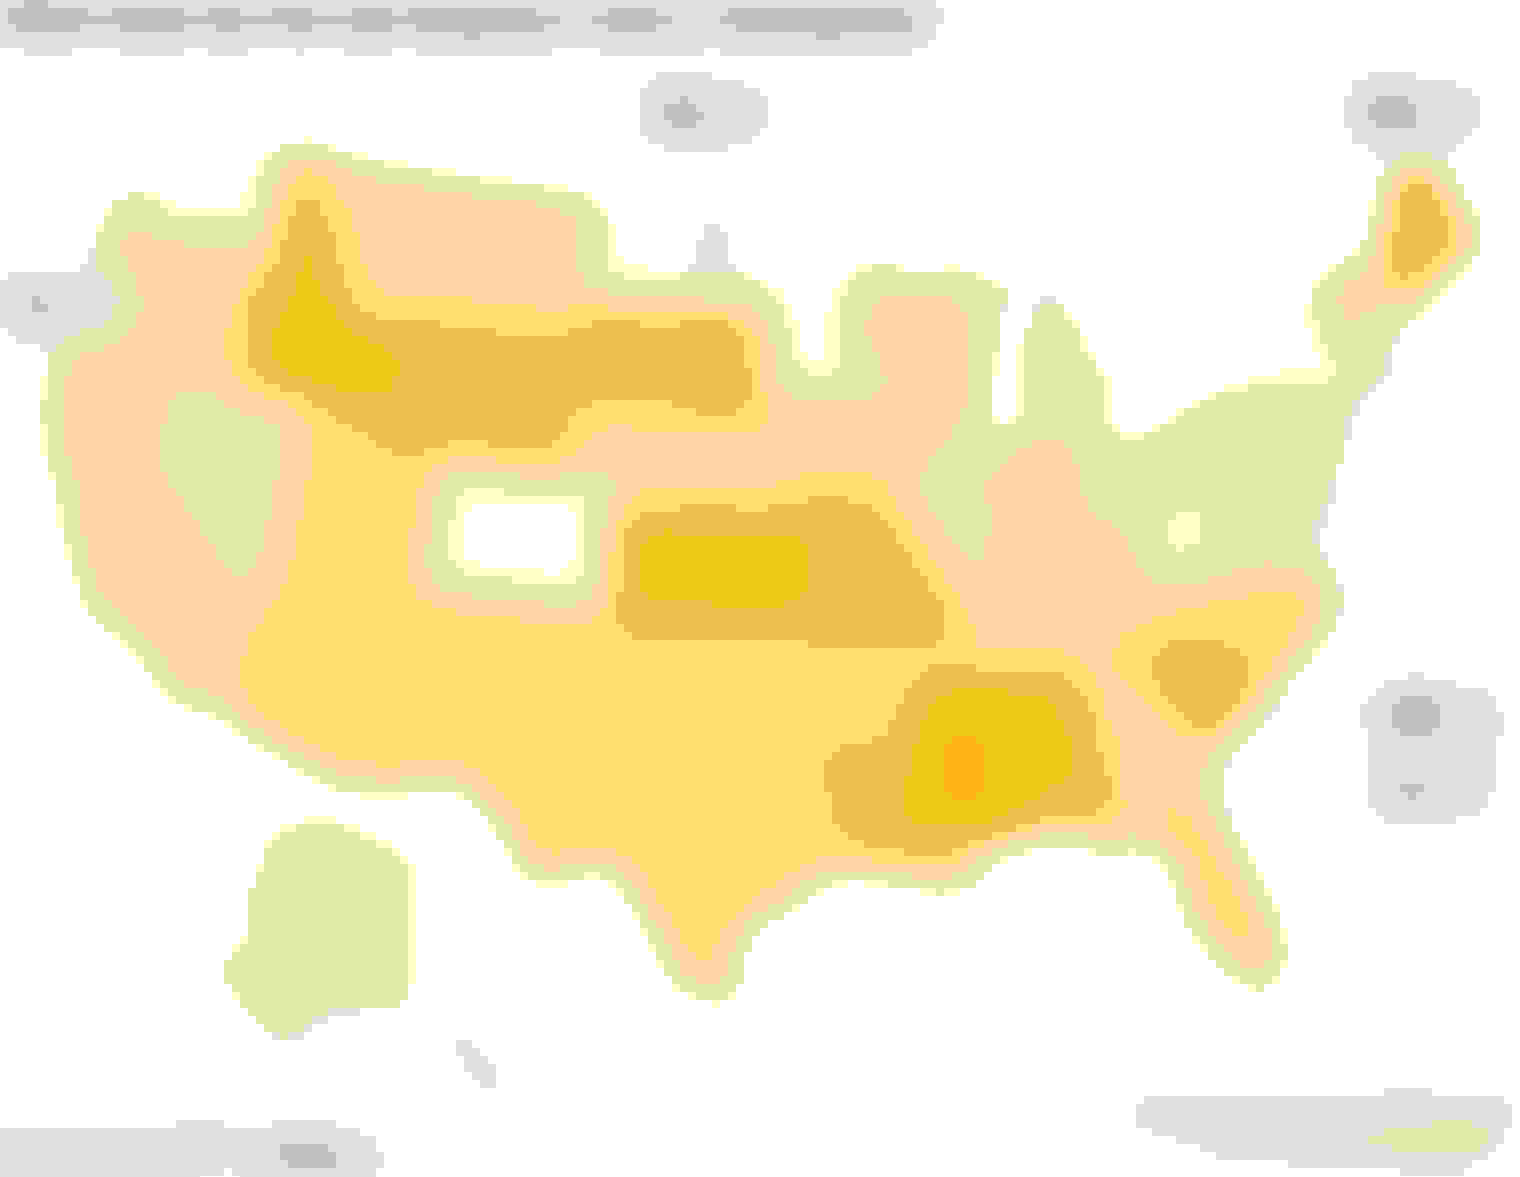 Heat map showing which states have the most road deaths over Thanksgiving weekend